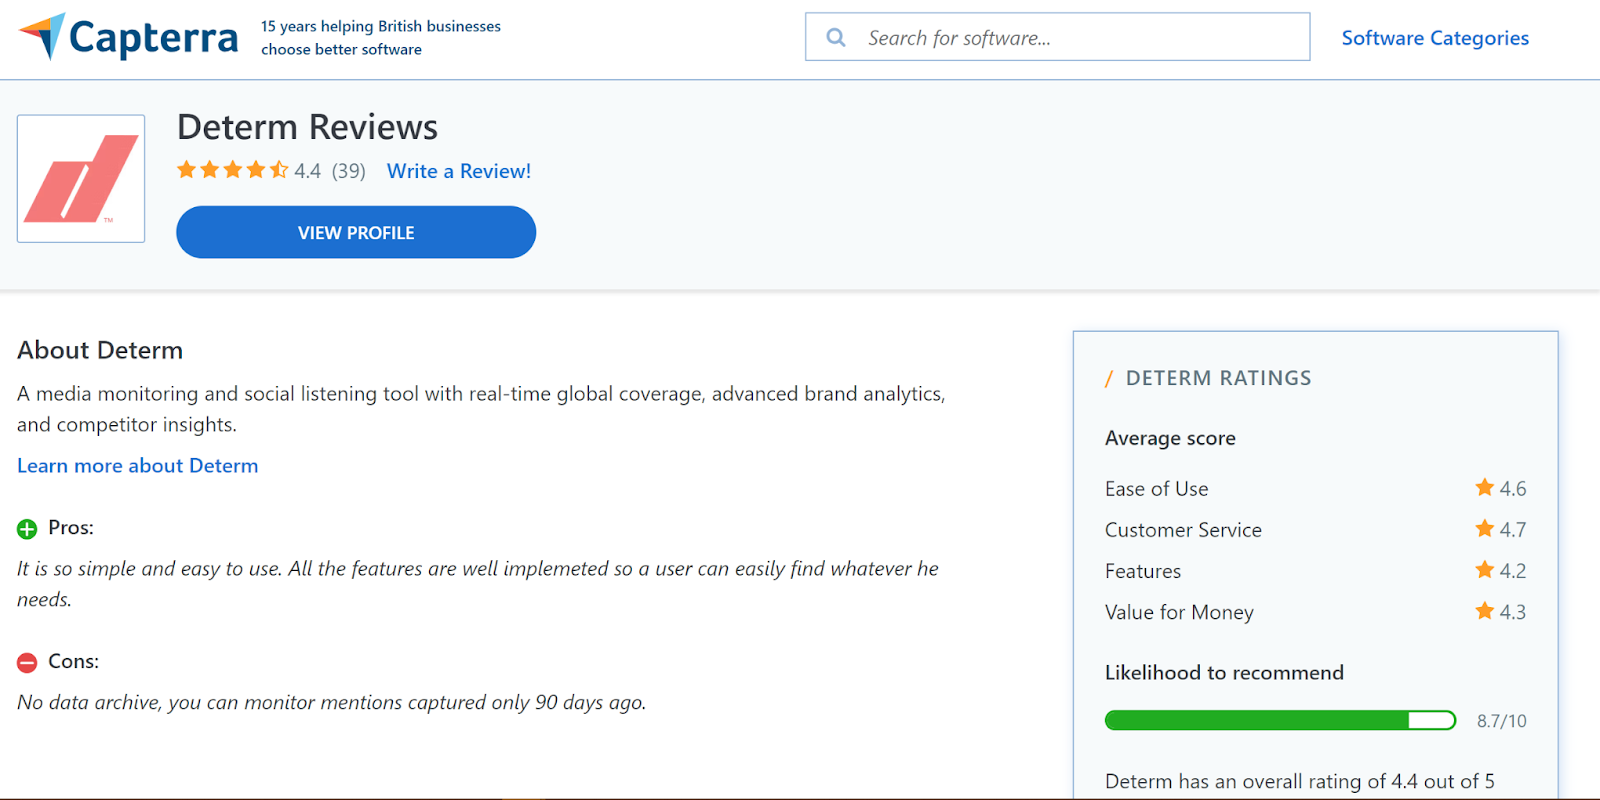 Capterra collects customer reviews